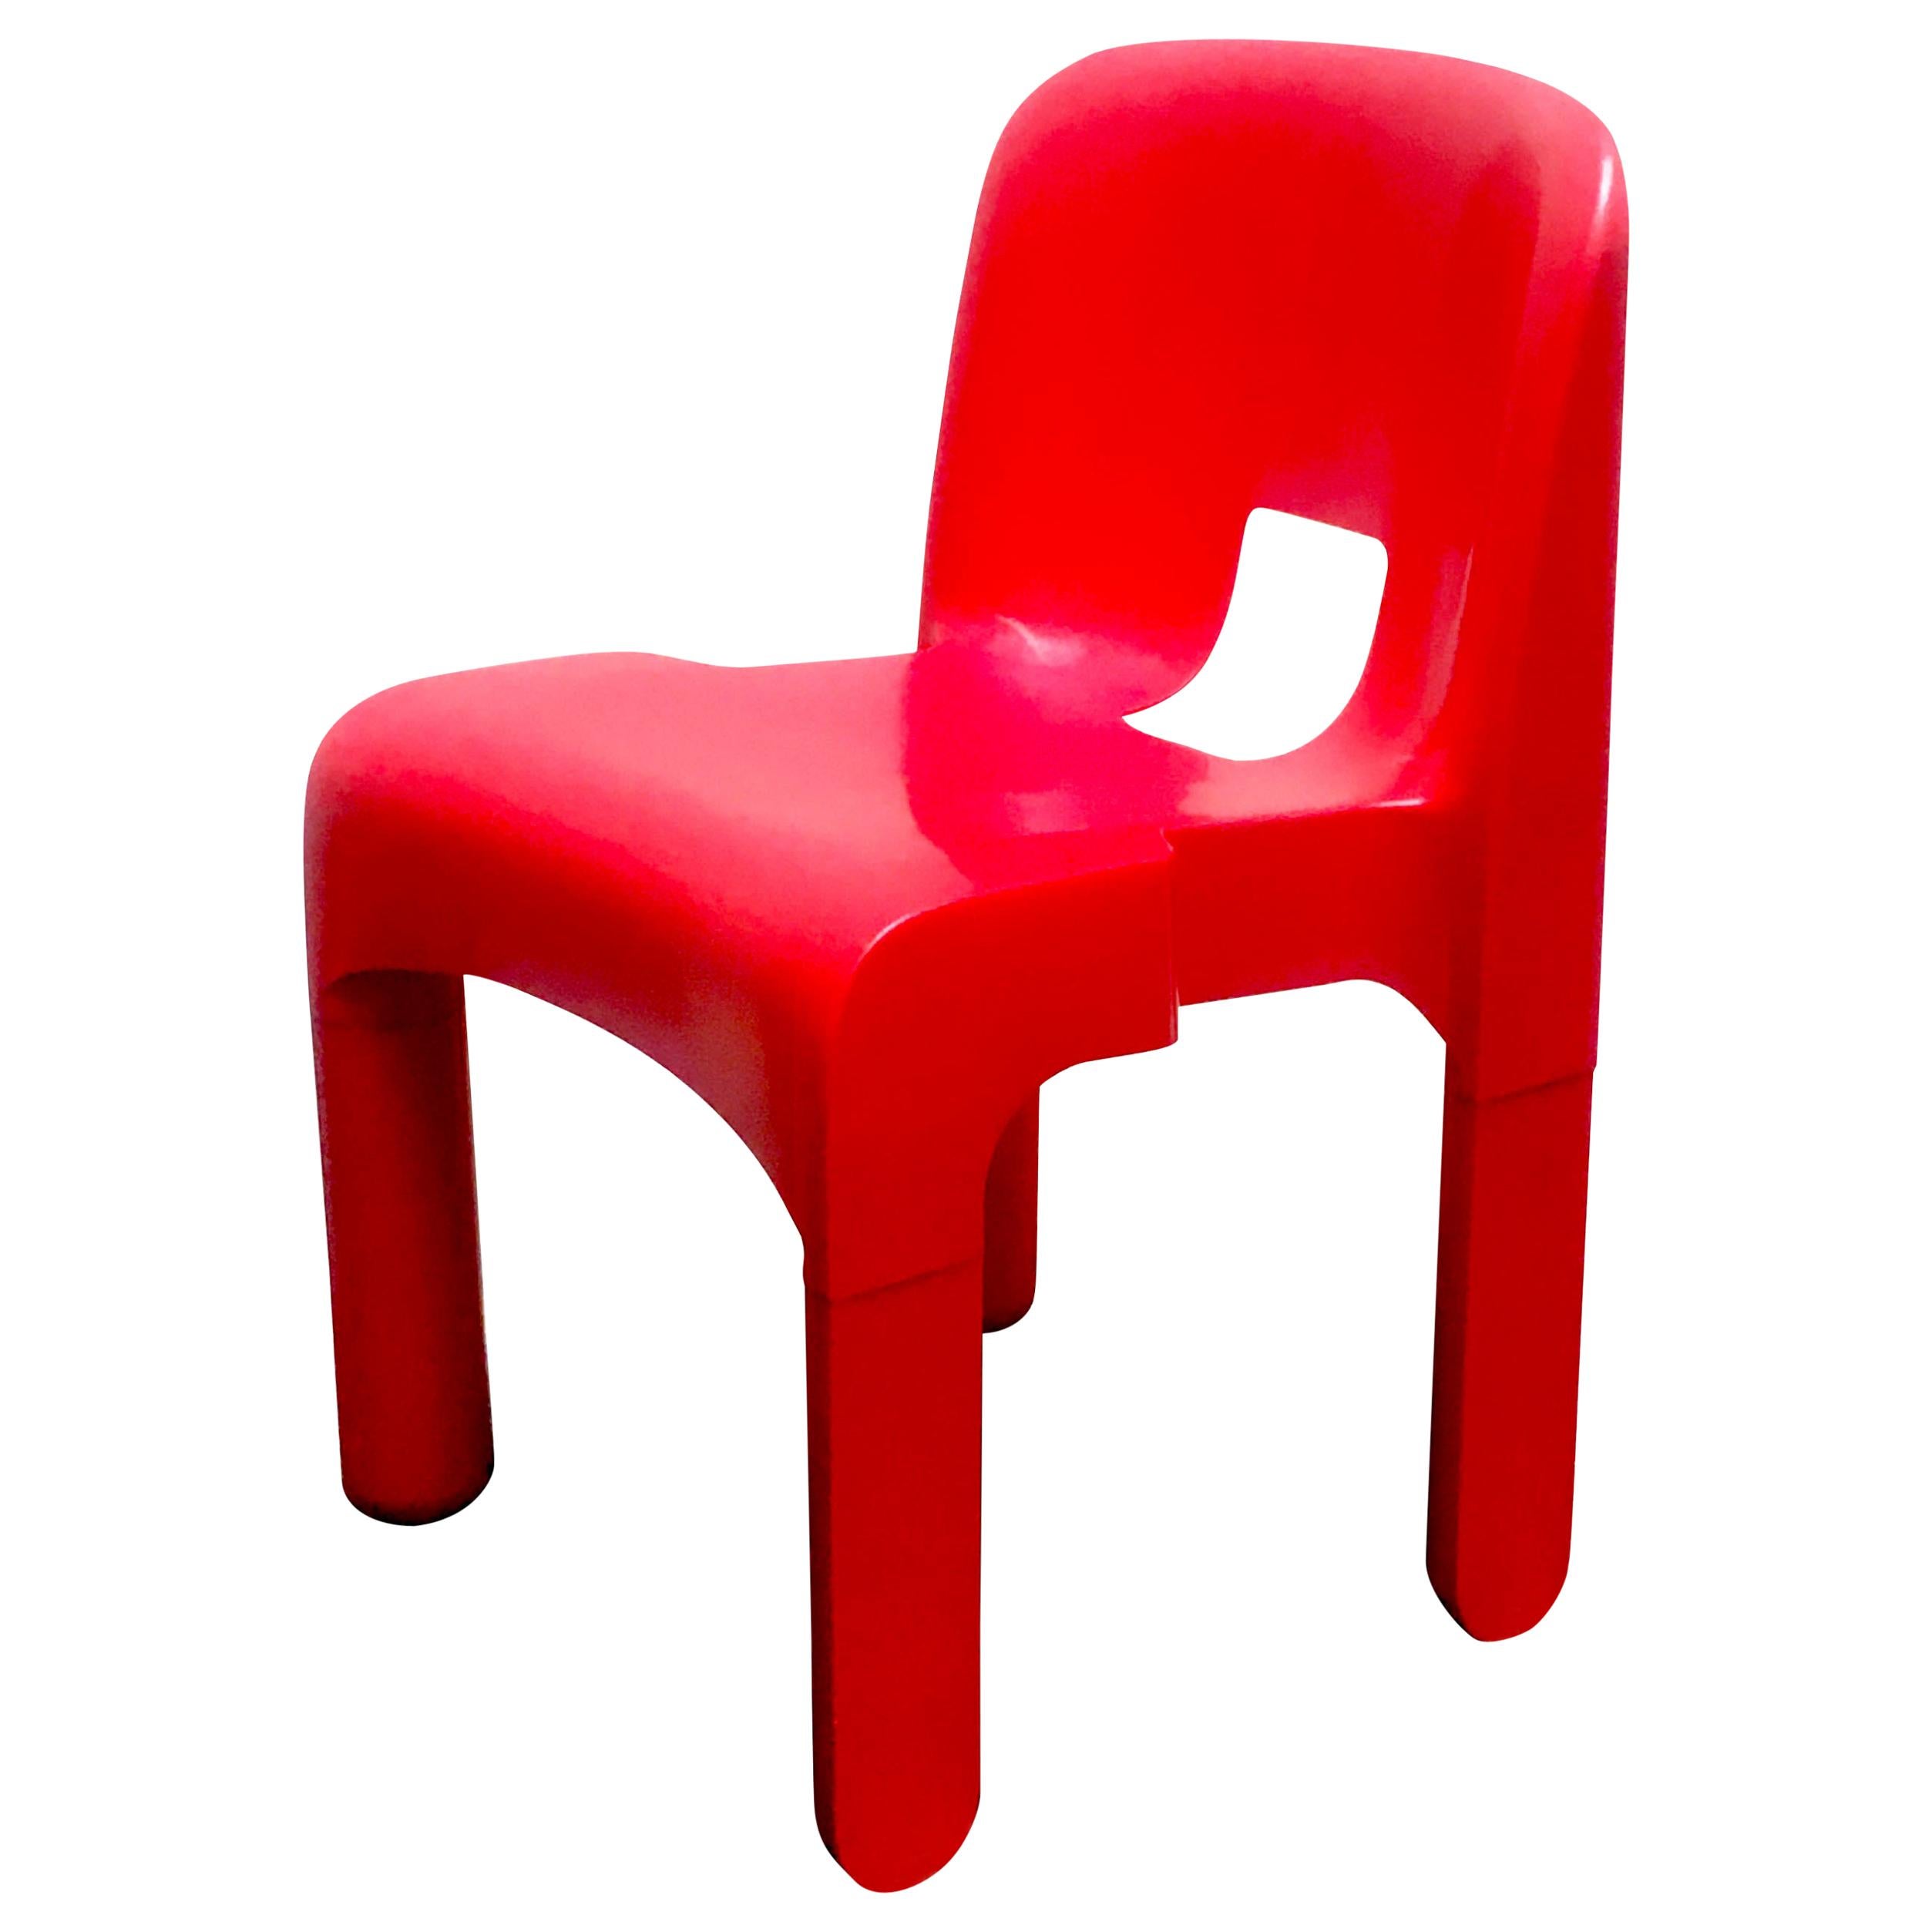 Red Joe Colombo Universale Plastic Chair by Kartell, Italy, 1967